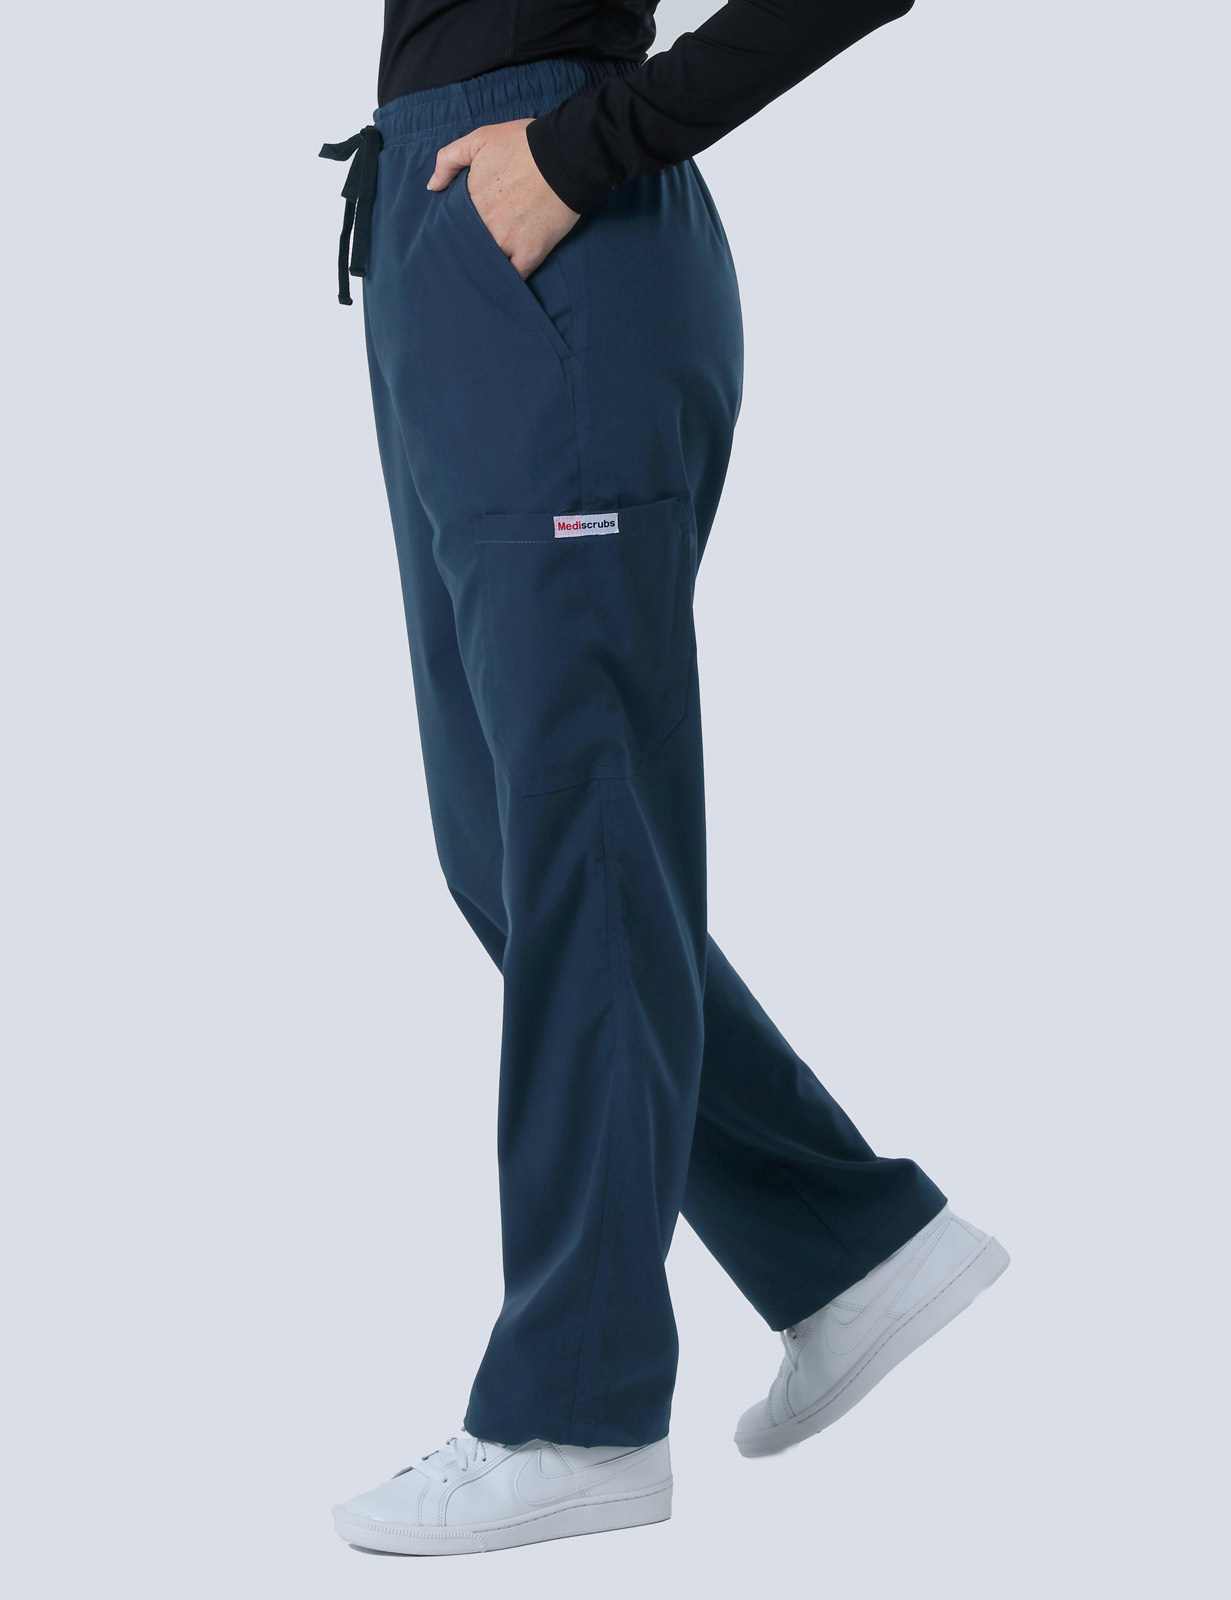 Royal Melbourne Hospital - ED (Women's Fit Solid Scrub Top and Cargo Pants in Navy incl Logos)